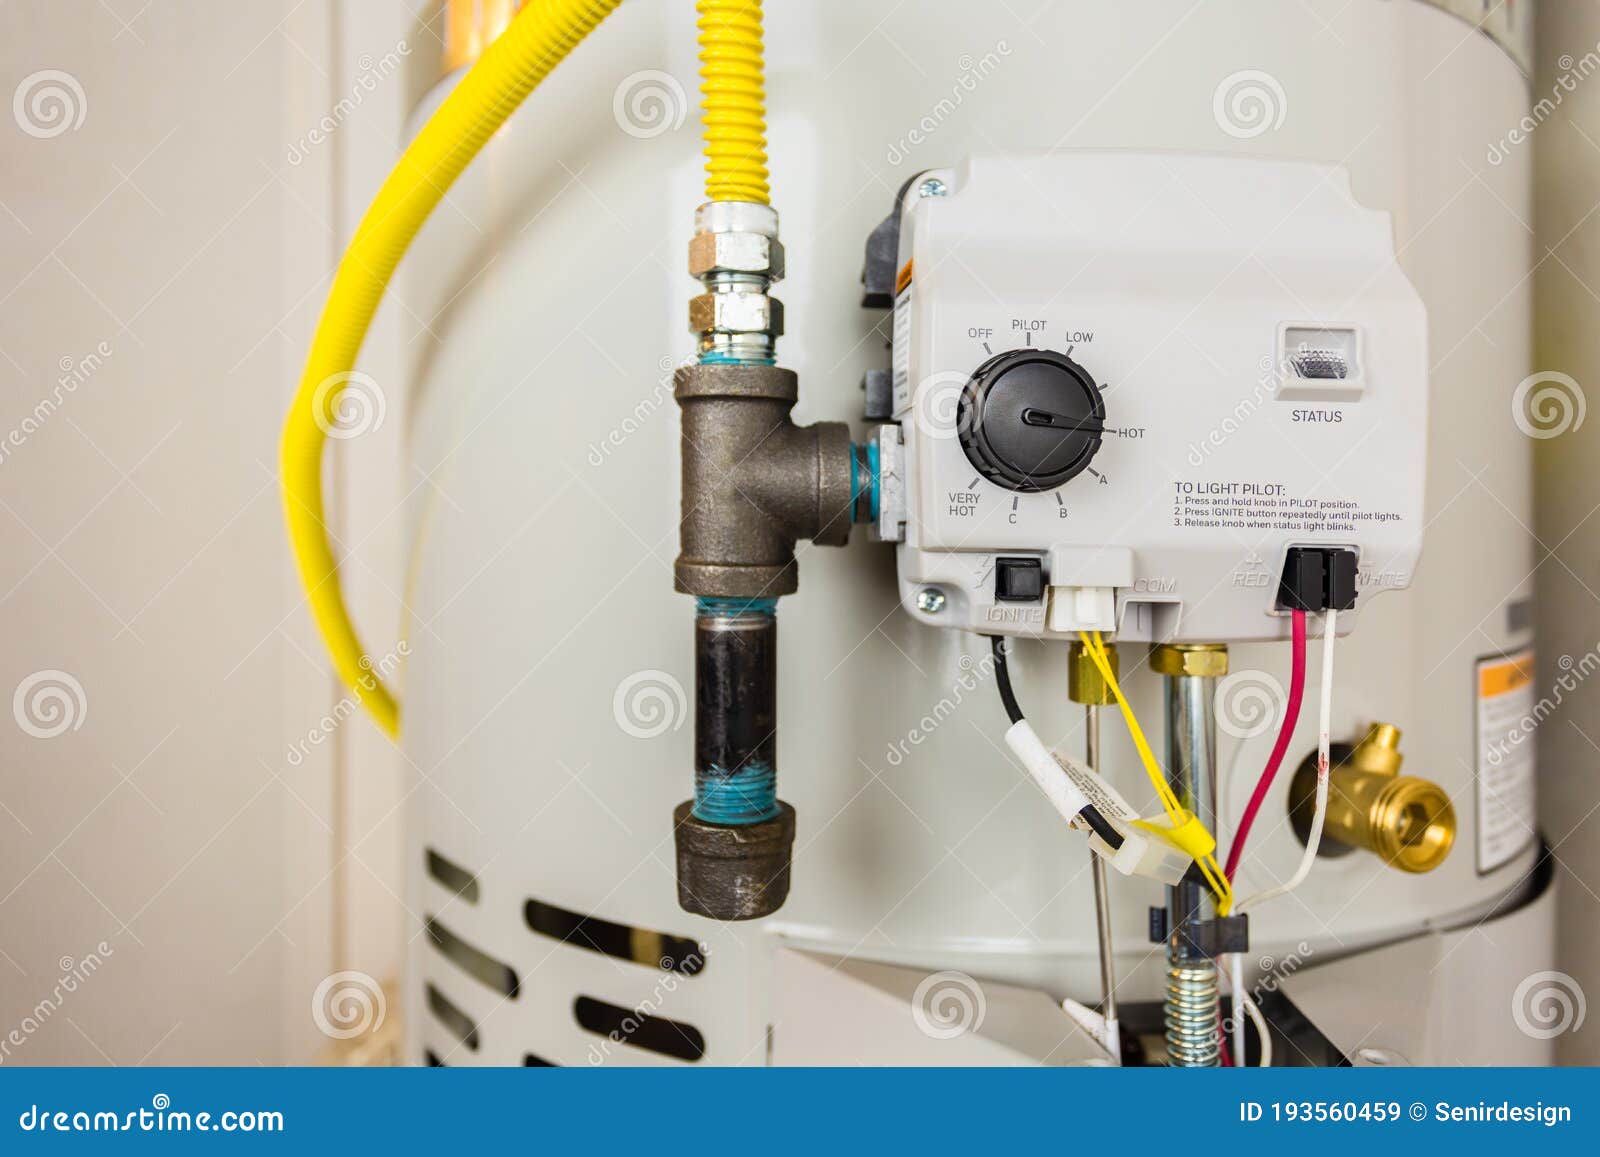 https://thumbs.dreamstime.com/z/modern-hot-water-heater-control-sd-close-up-shot-thermostat-great-image-concept-plumbing-repair-installation-maintenance-193560459.jpg